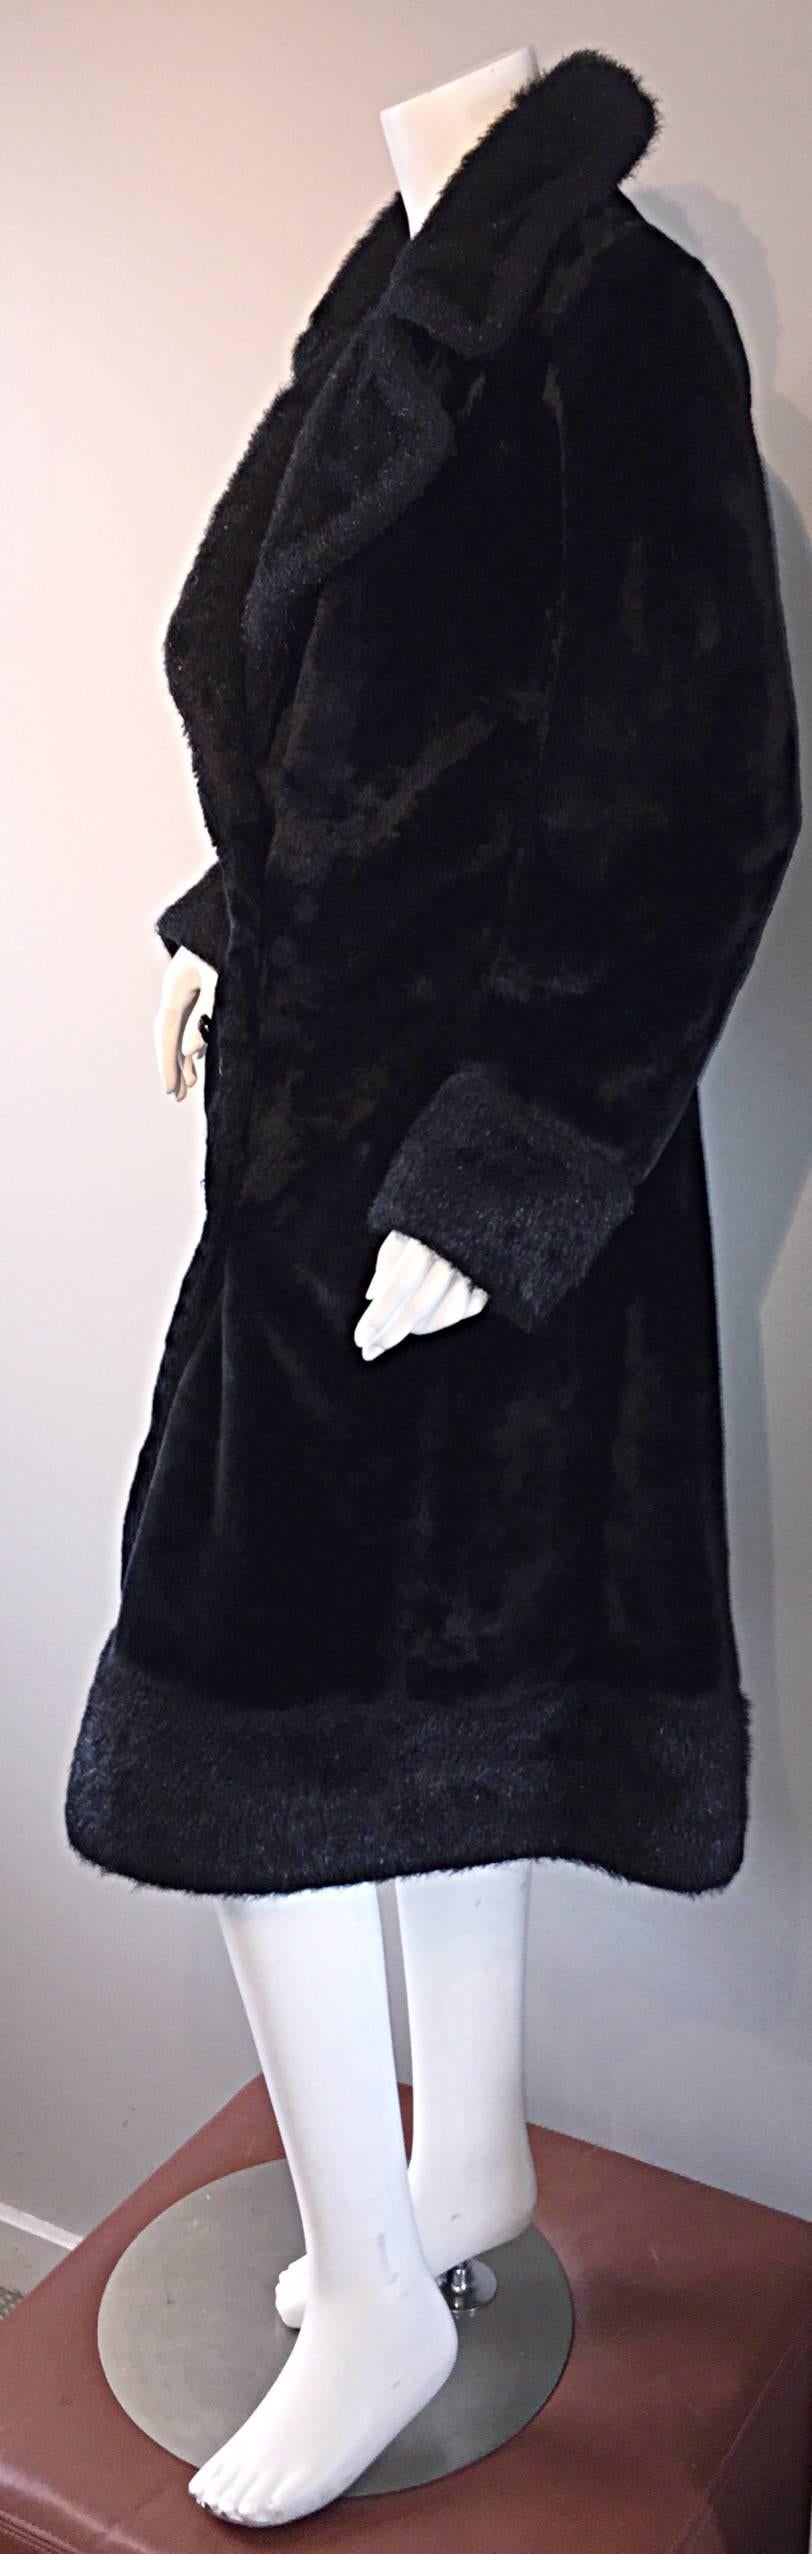 1960s Vintage Mackintosh Black Faux Fur 60s Double Breasted Swing Jacket Coat For Sale 1